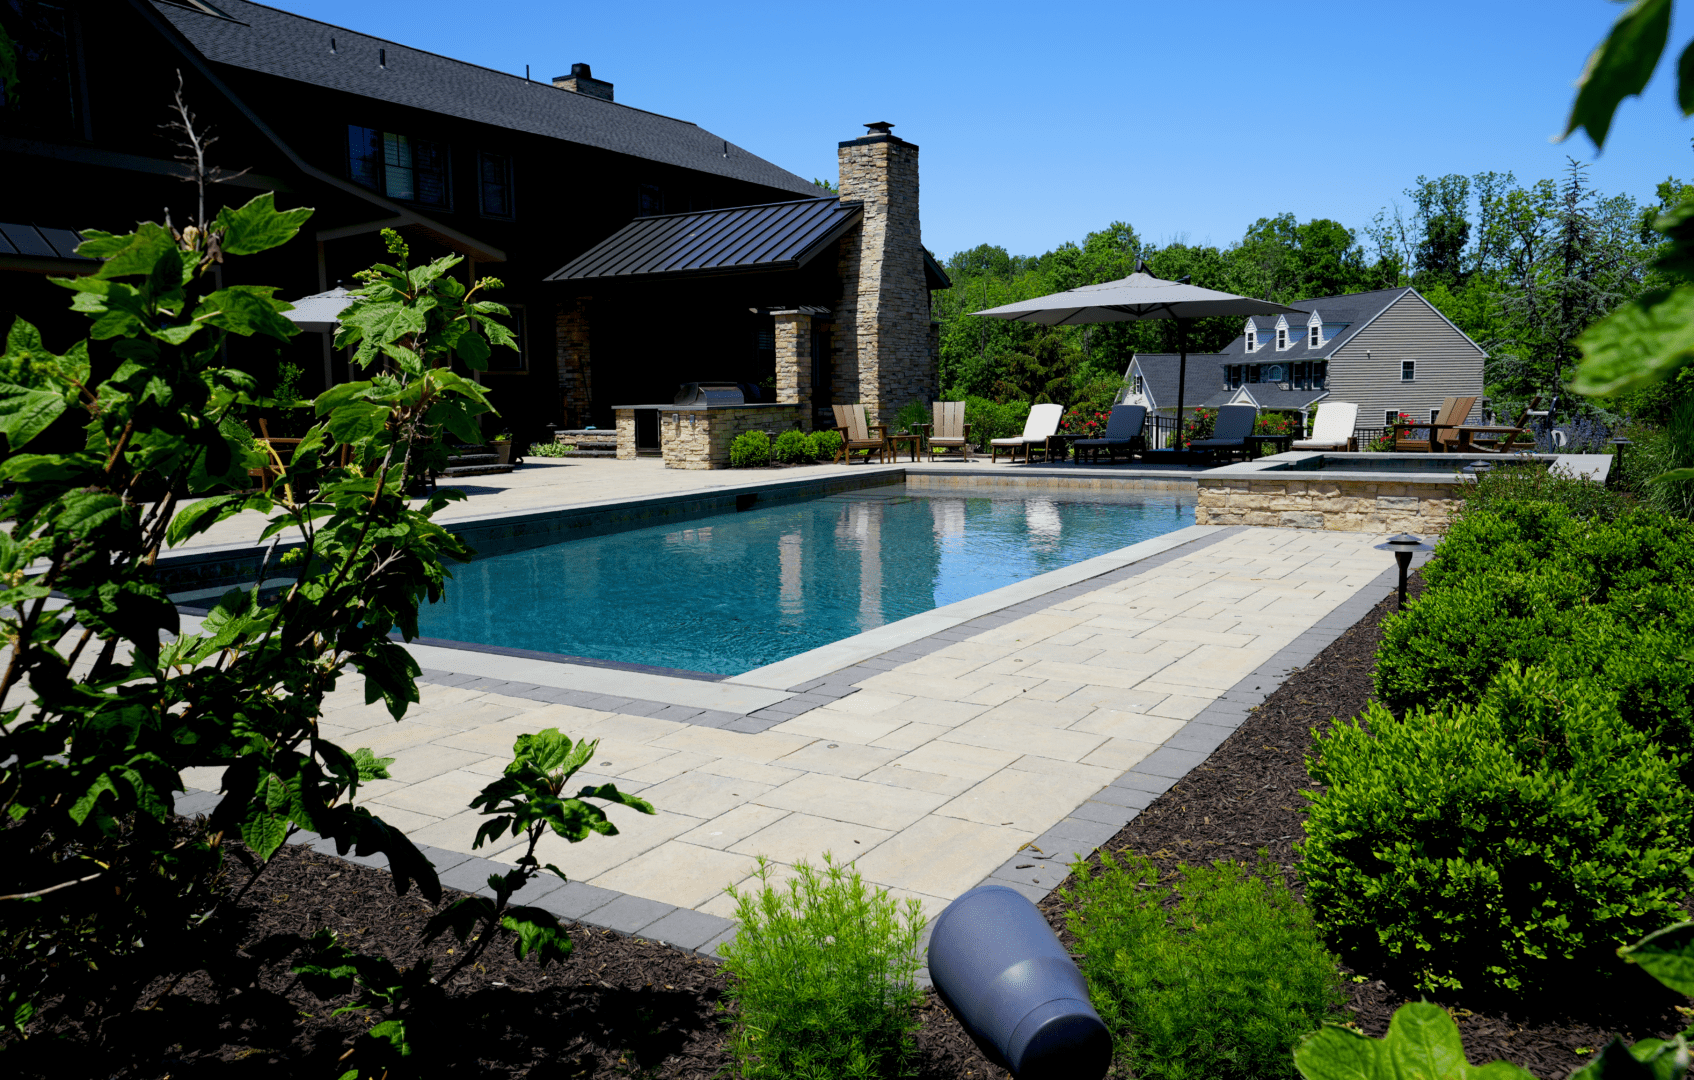 A beautifully designed swimming pool in the backyard of a house.